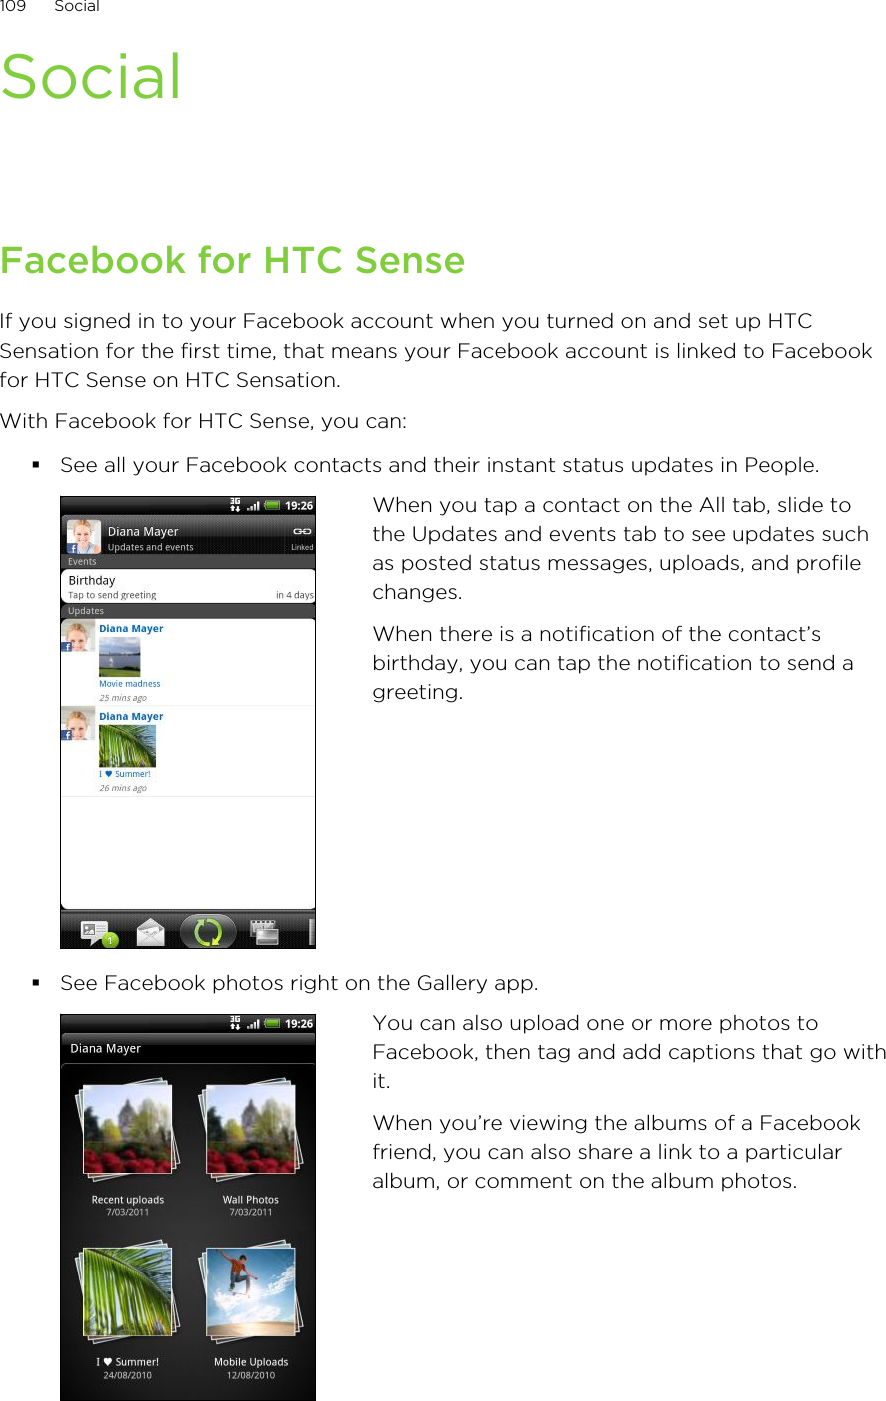 SocialFacebook for HTC SenseIf you signed in to your Facebook account when you turned on and set up HTCSensation for the first time, that means your Facebook account is linked to Facebookfor HTC Sense on HTC Sensation.With Facebook for HTC Sense, you can:§See all your Facebook contacts and their instant status updates in People.When you tap a contact on the All tab, slide tothe Updates and events tab to see updates suchas posted status messages, uploads, and profilechanges.When there is a notification of the contact’sbirthday, you can tap the notification to send agreeting.§See Facebook photos right on the Gallery app.You can also upload one or more photos toFacebook, then tag and add captions that go withit.When you’re viewing the albums of a Facebookfriend, you can also share a link to a particularalbum, or comment on the album photos.109 Social